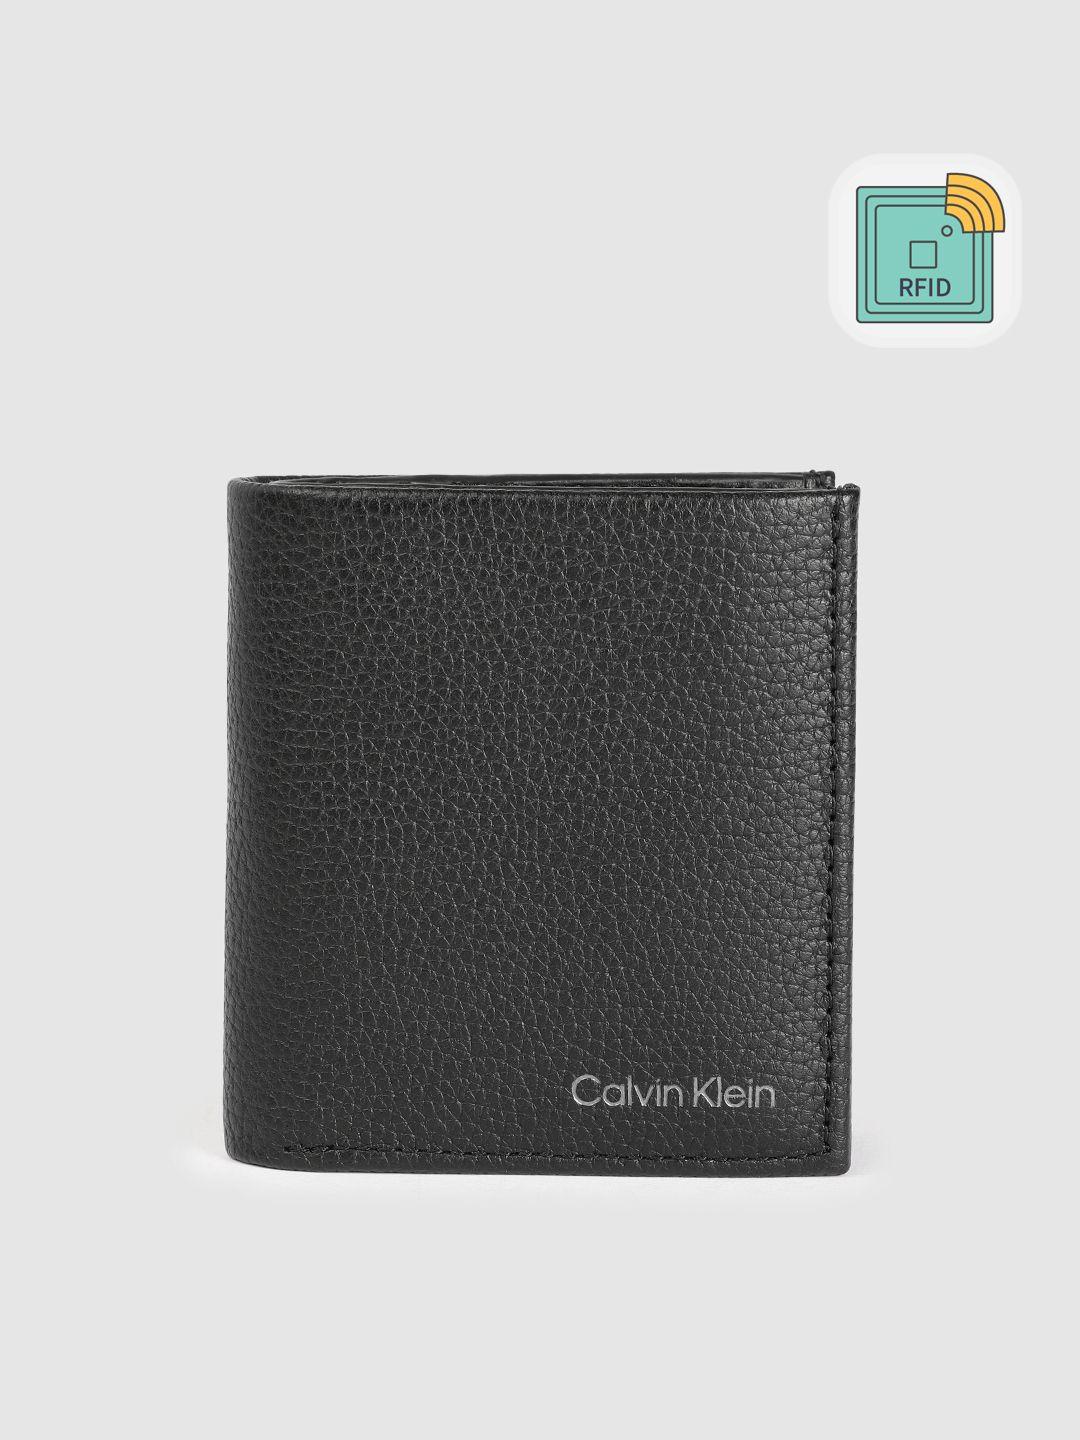 Calvin Klein Men Animal Textured Leather Two Fold Wallet With RFID